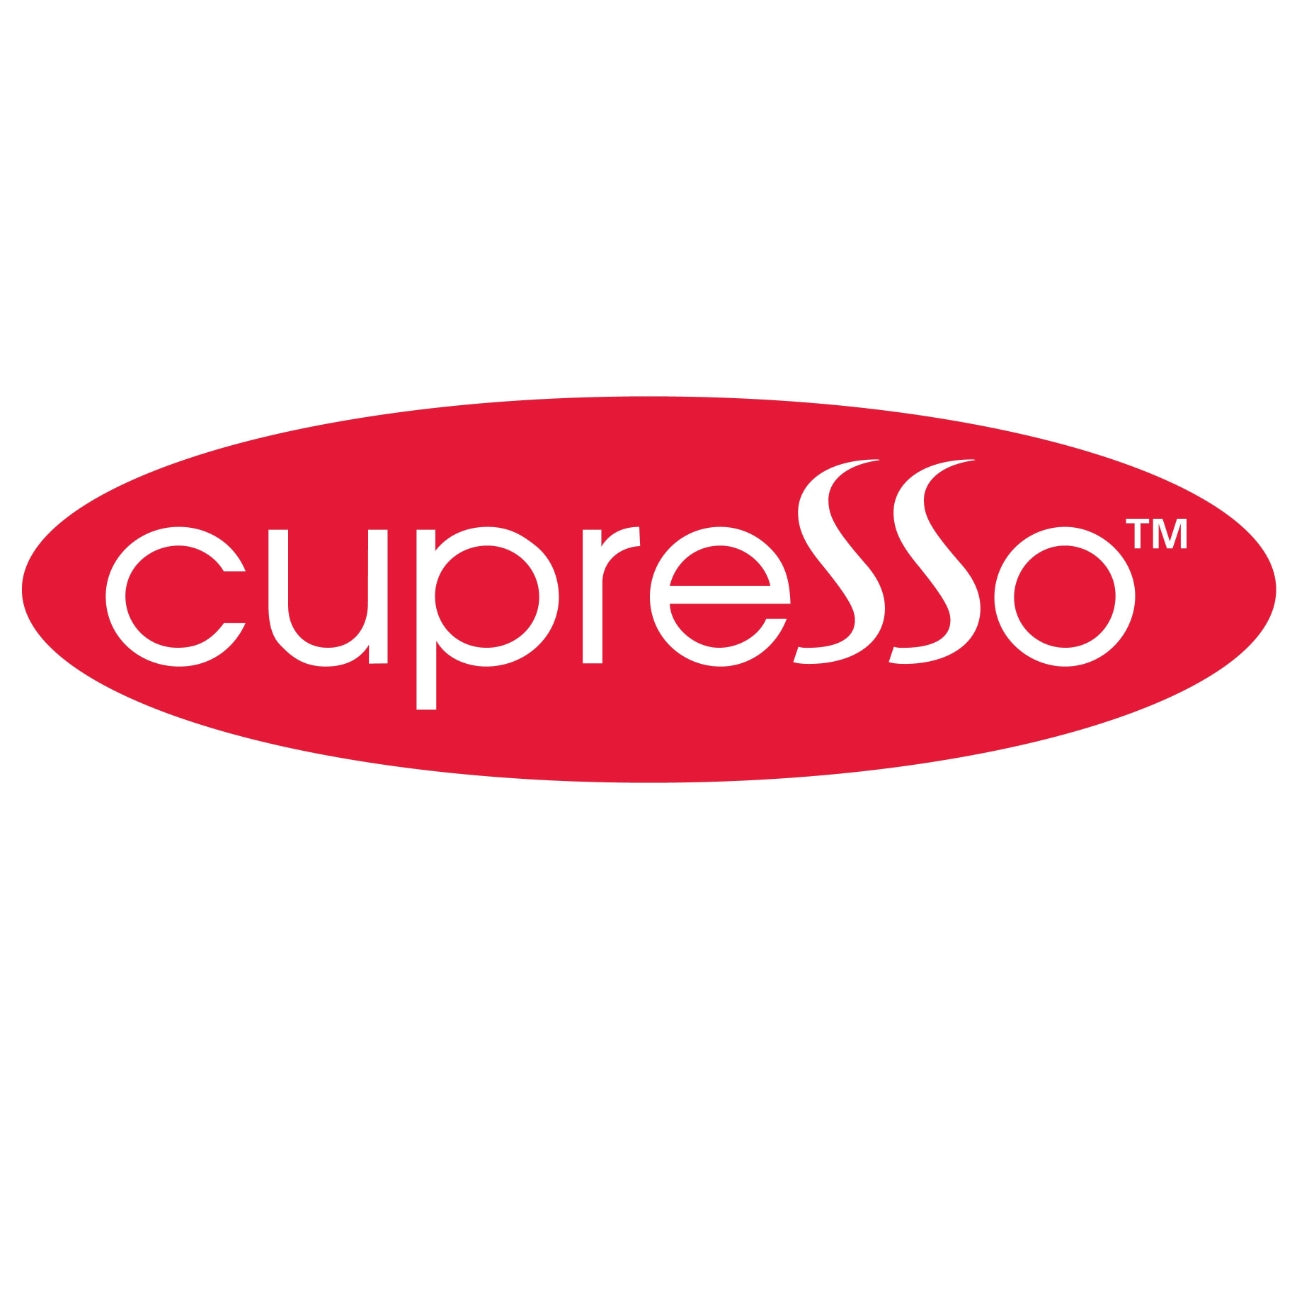 Cupresso: A cup and press combined. Fresh coffee!